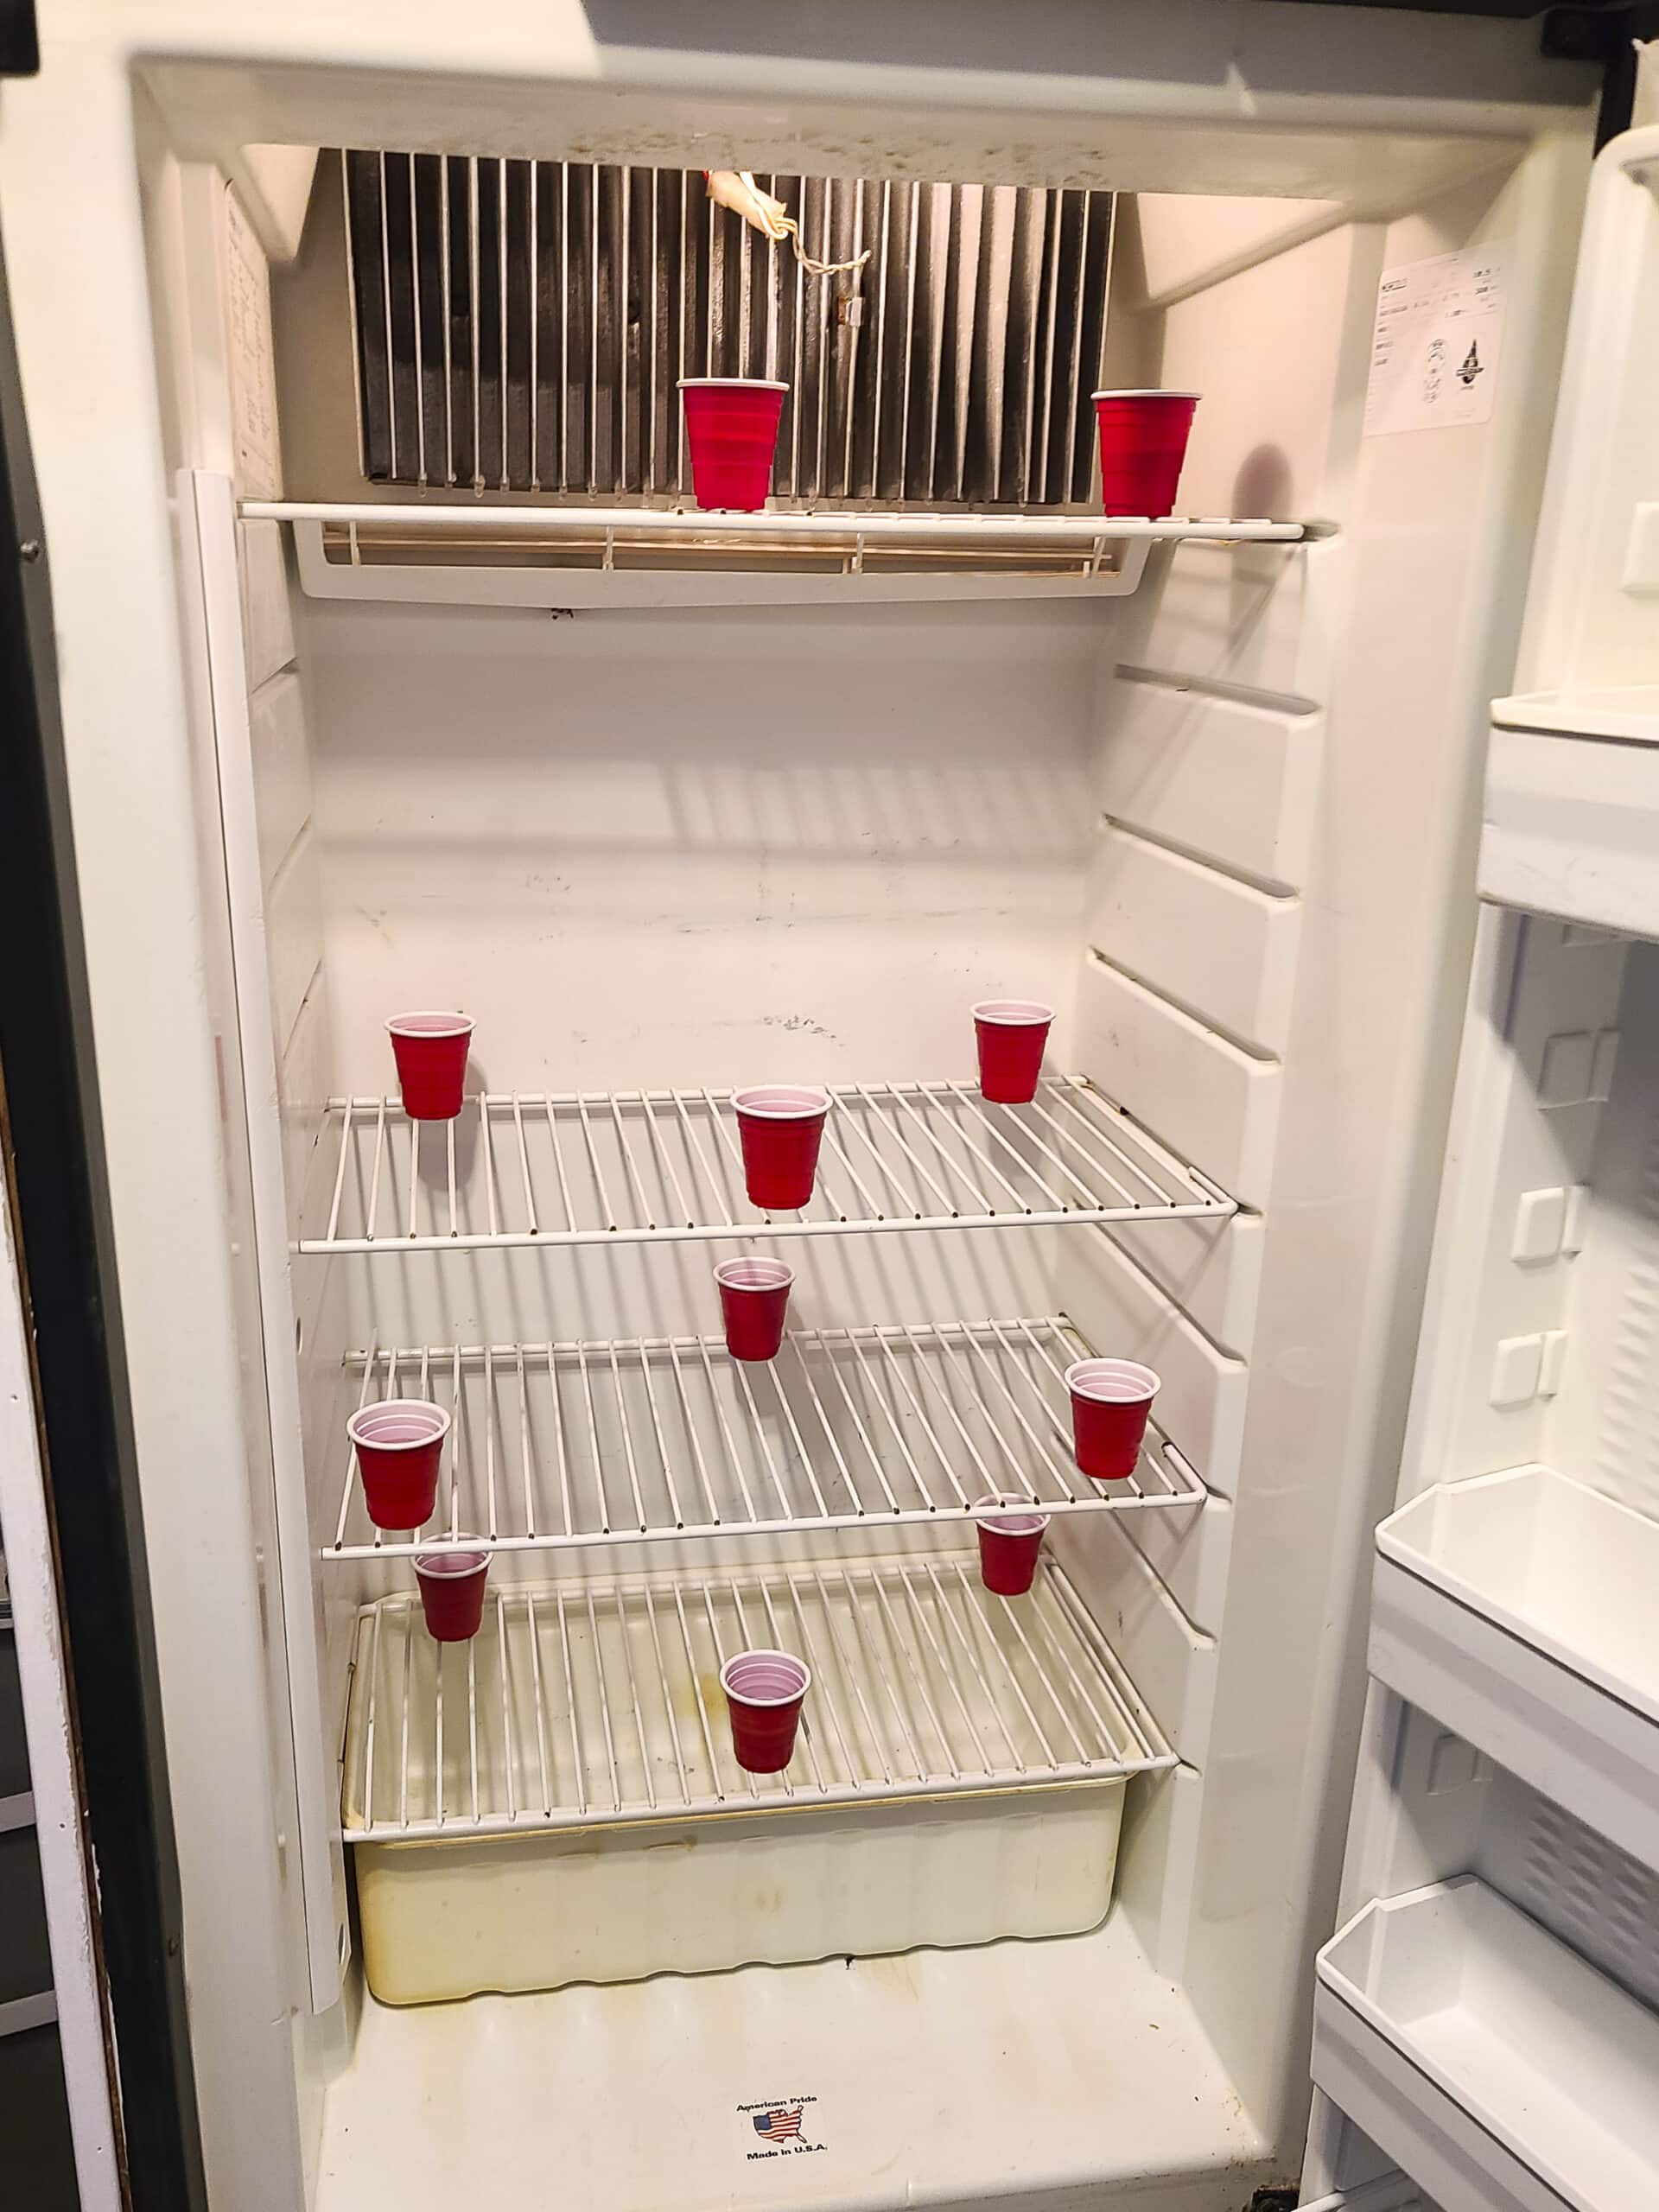 Looking at the inside of an RV refrigerator.  There are 11 small red cups placed in different areas.